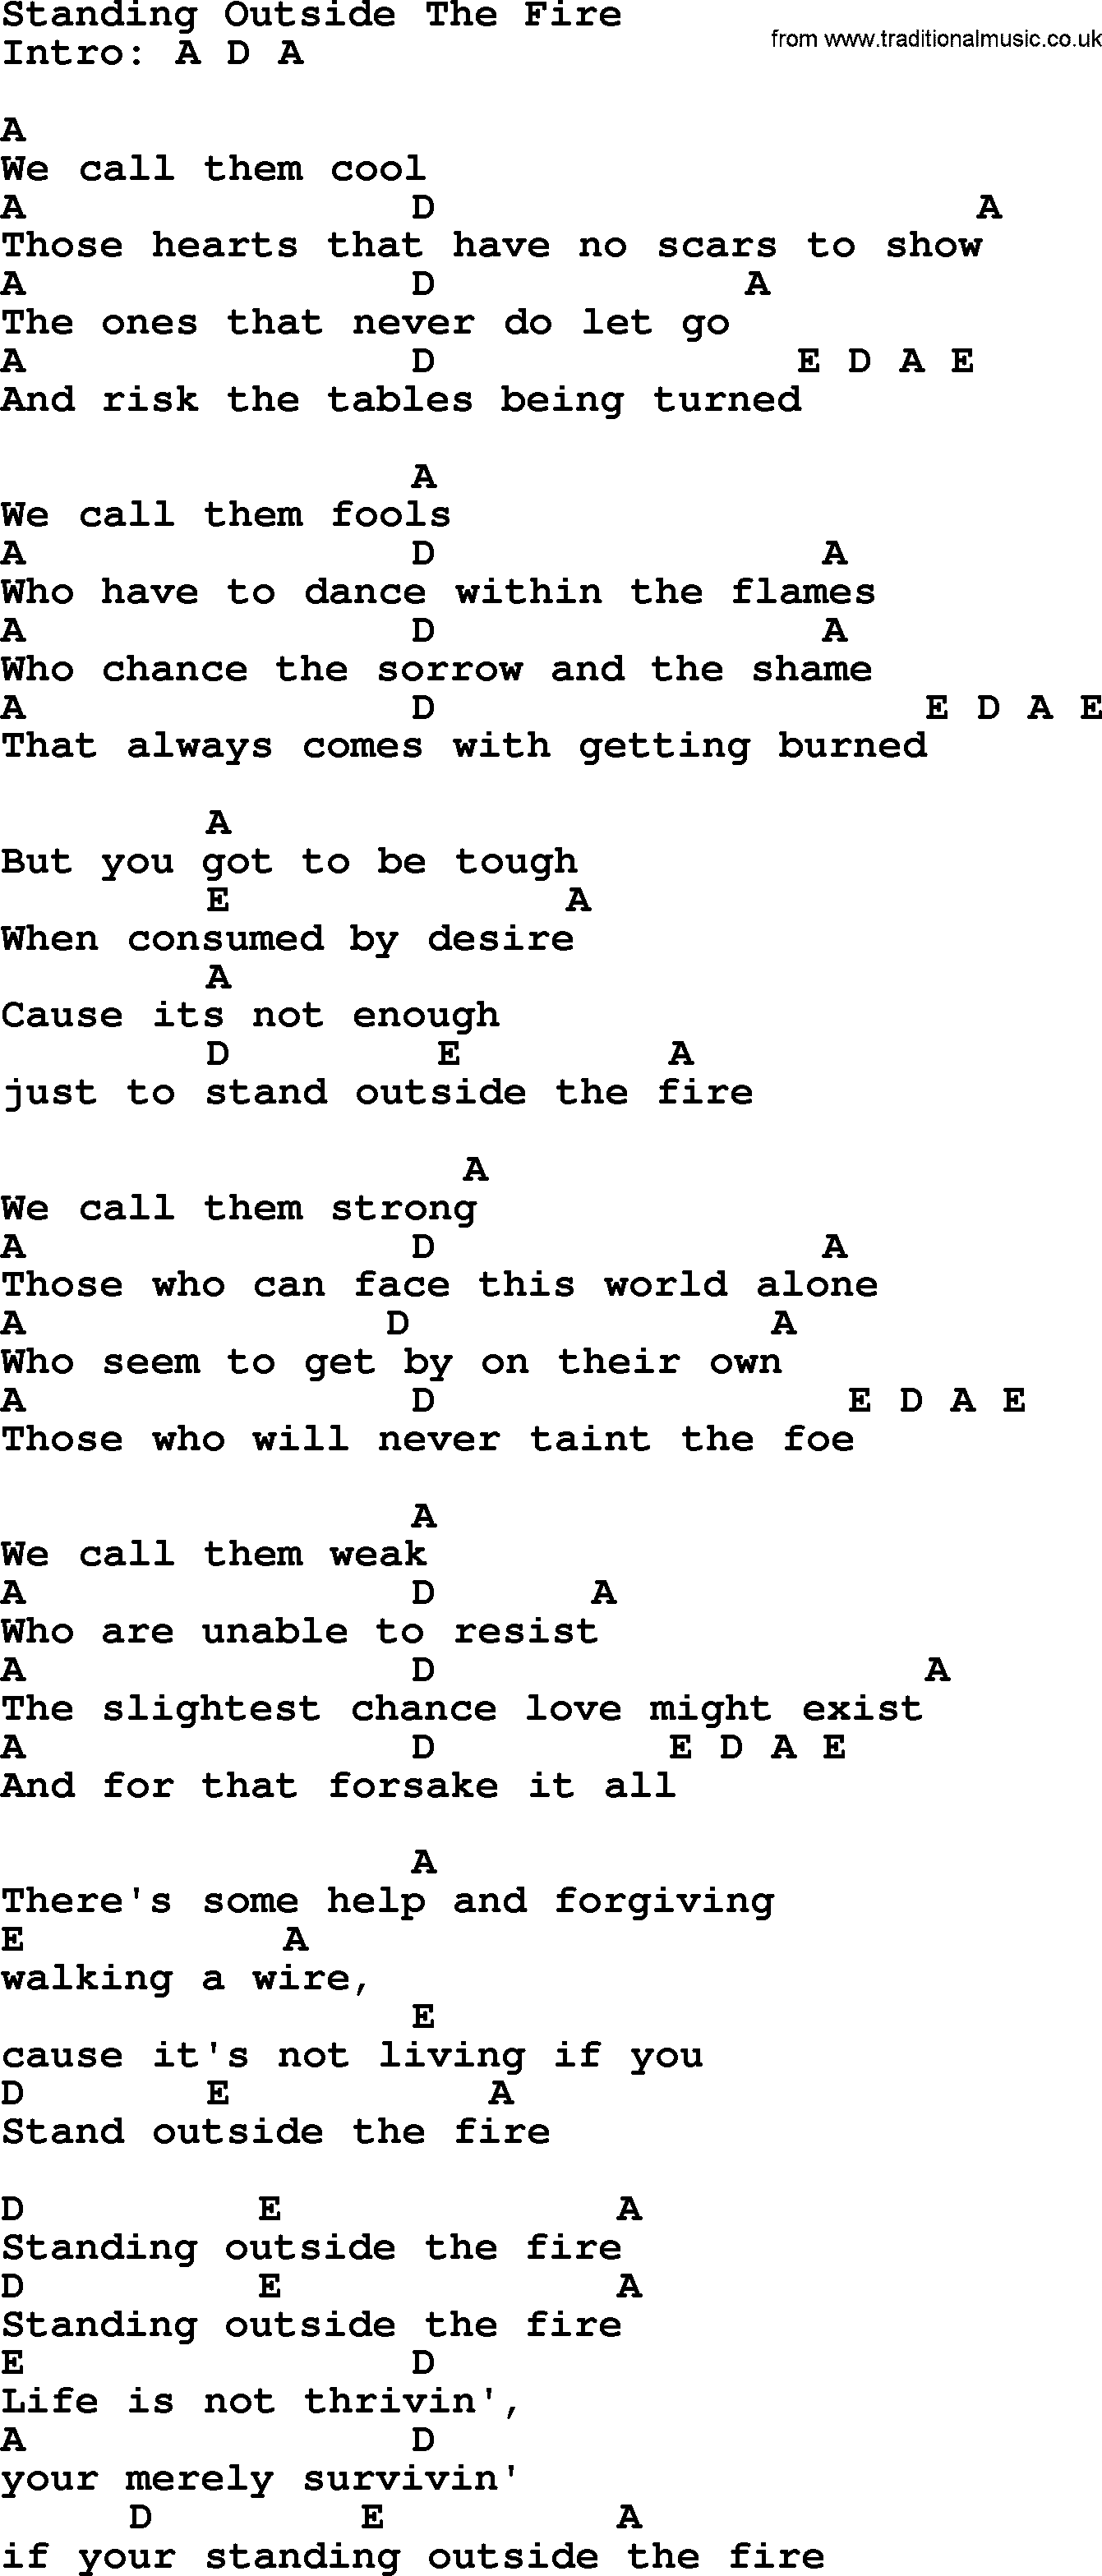 Garth Brooks song: Standing Outside The Fire, lyrics and chords